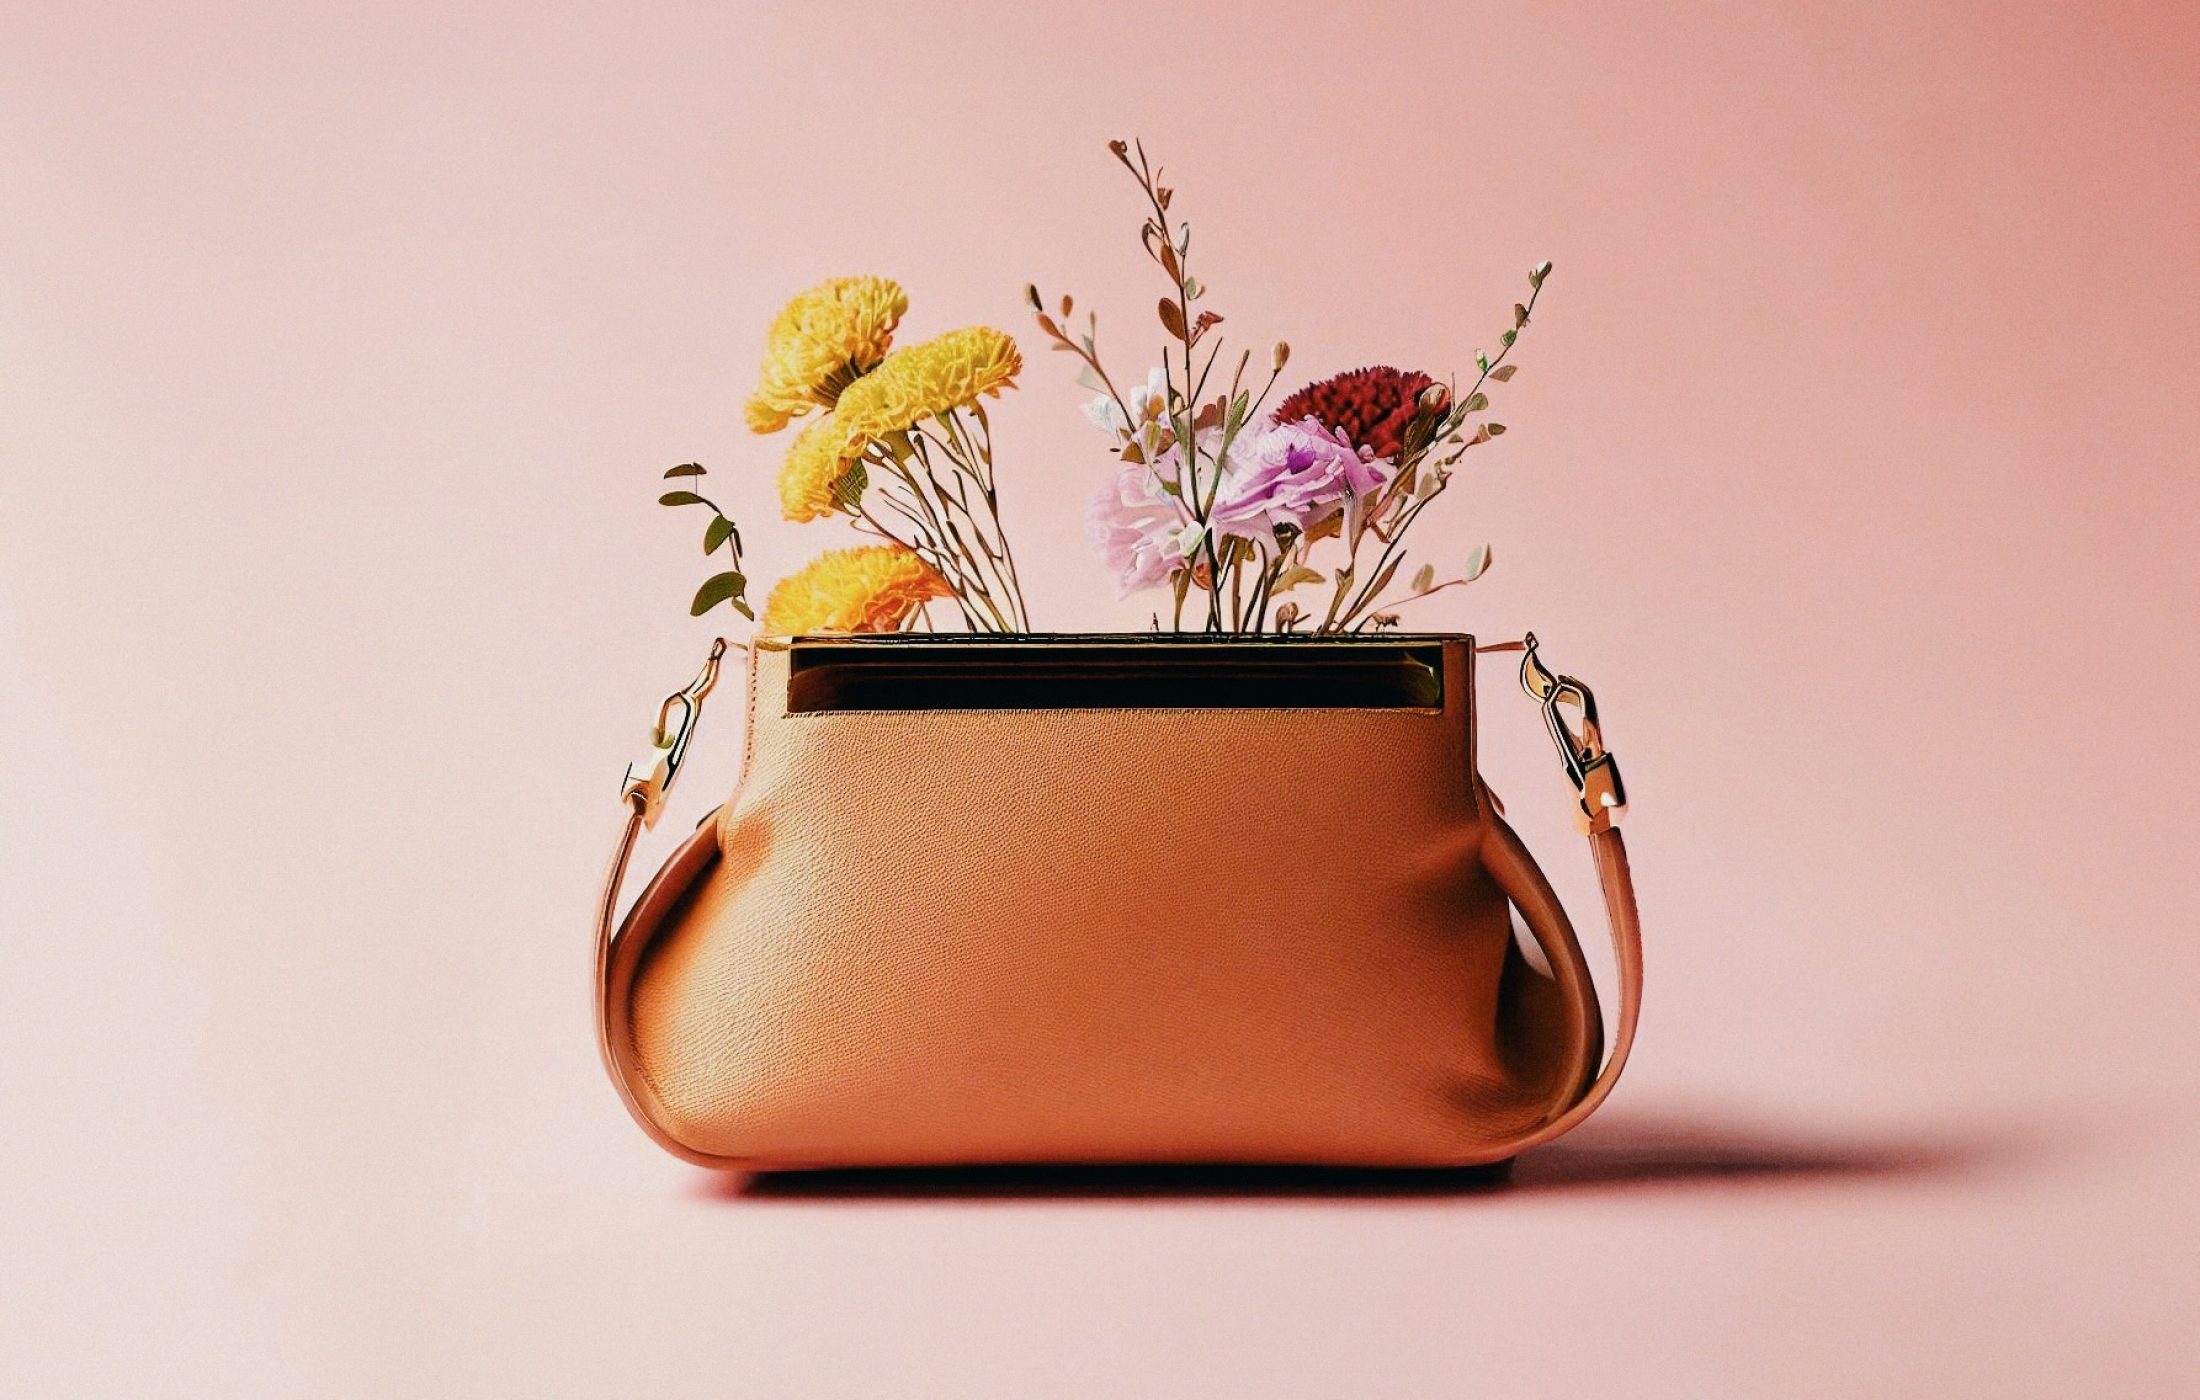 Woman's leather handbag with flowers sticking out of the top